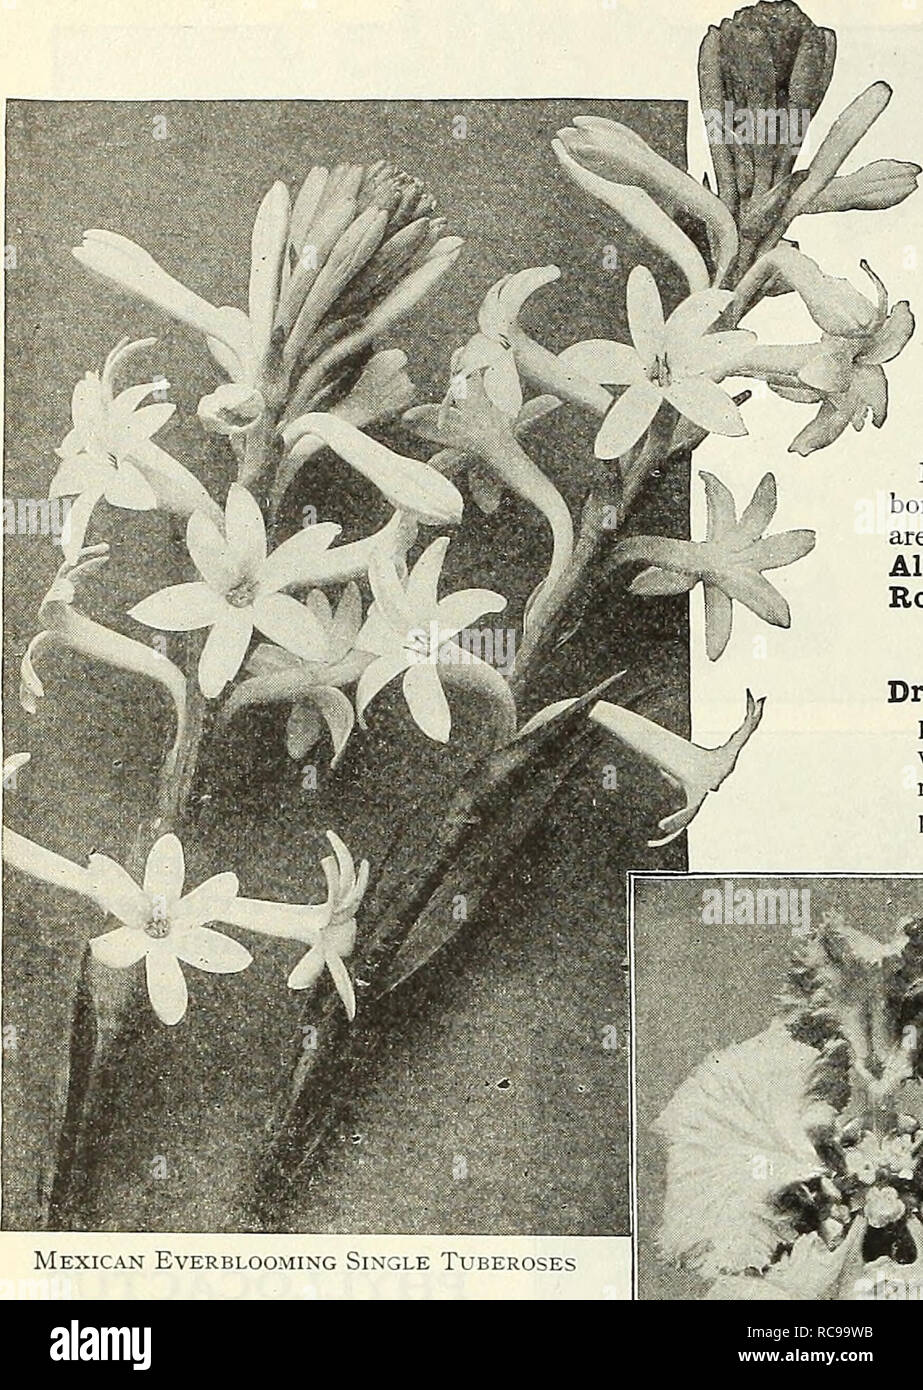 . Dreer's garden book 1923. Seeds Catalogs; Nursery stock Catalogs; Gardening Equipment and supplies Catalogs; Flowers Seeds Catalogs; Vegetables Seeds Catalogs; Fruit Seeds Catalogs. 166 /flEWyA-IllEPu^ ,QARDEN™» GREENHOUSE PIANTA &gt;HlLSBEliPHRlk. VIBURNUM Tinus. A pretty greenhouse shrub commonly known as Laurustinus, producing large trusses of white flowers early in the spring. 50 cts. each. ,^ VINCA Major Variegata {Variegated Periwinkle). One of the very best plants for vases, and for traihng over the edges of window boxes, etc. Leaves glossy-green, broadly margined creamy- white; blue Stock Photo